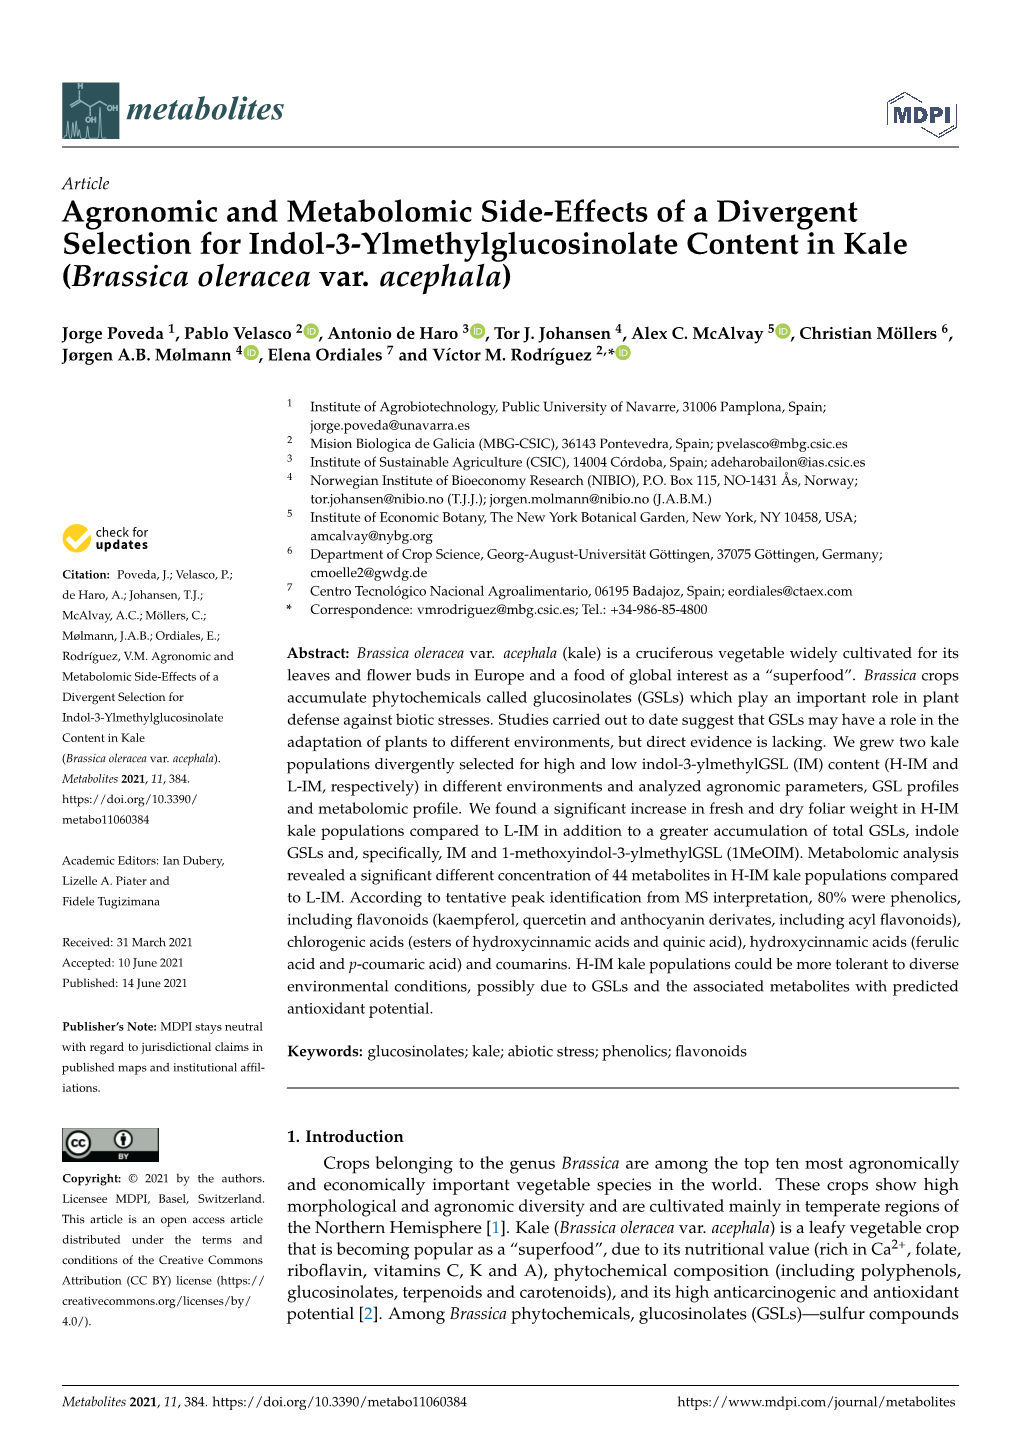 Agronomic and Metabolomic Side-Effects of a Divergent Selection for Indol-3-Ylmethylglucosinolate Content in Kale (Brassica Oleracea Var